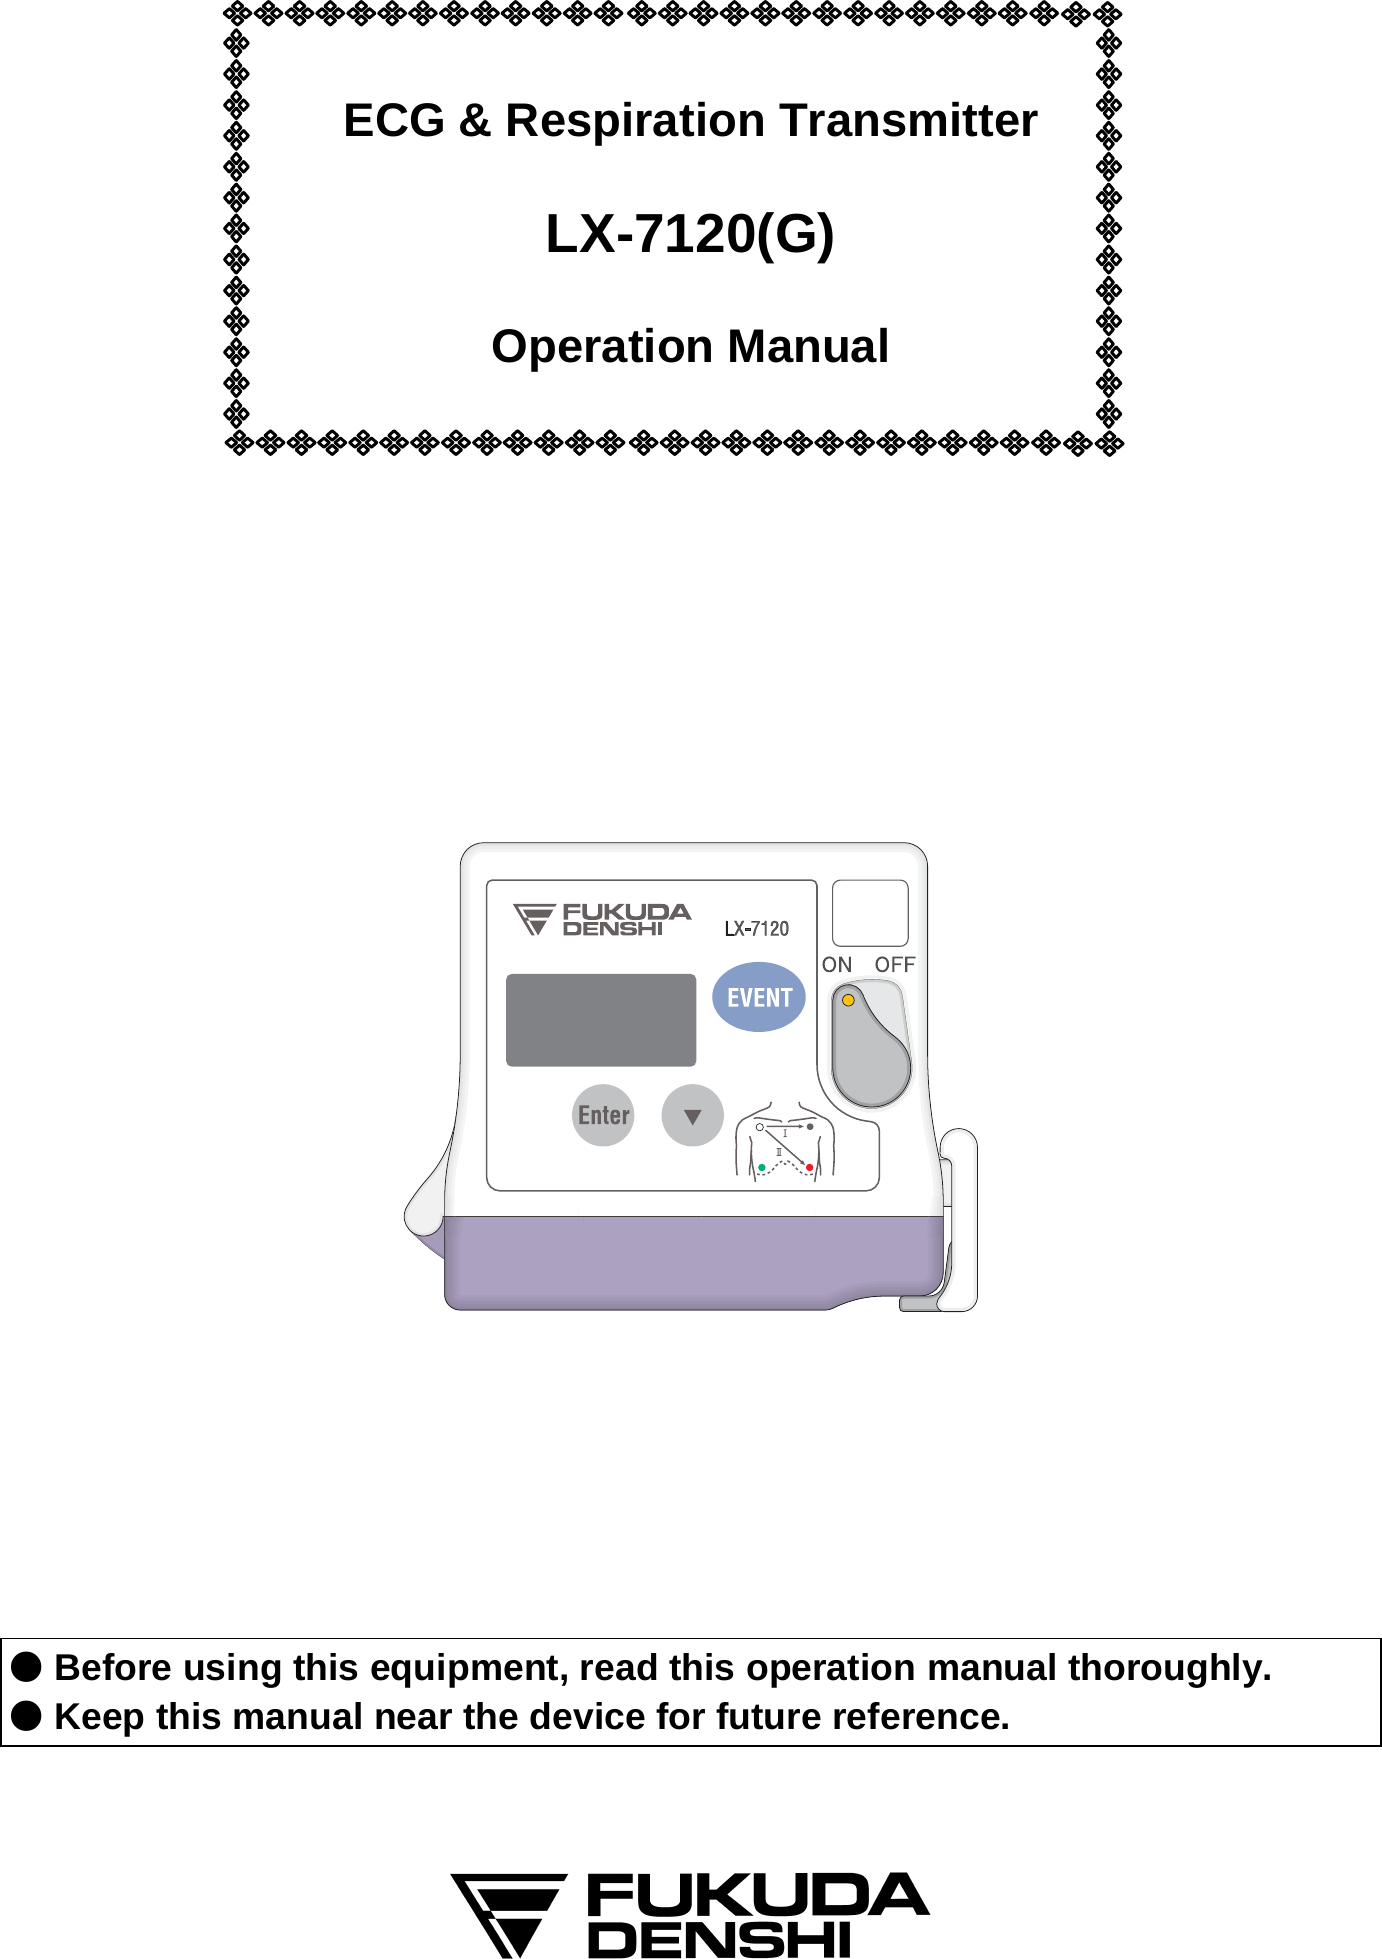   ECG &amp; Respiration Transmitter  LX-7120(G)  Operation Manual                    ● Before using this equipment, read this operation manual thoroughly. ● Keep this manual near the device for future reference.     